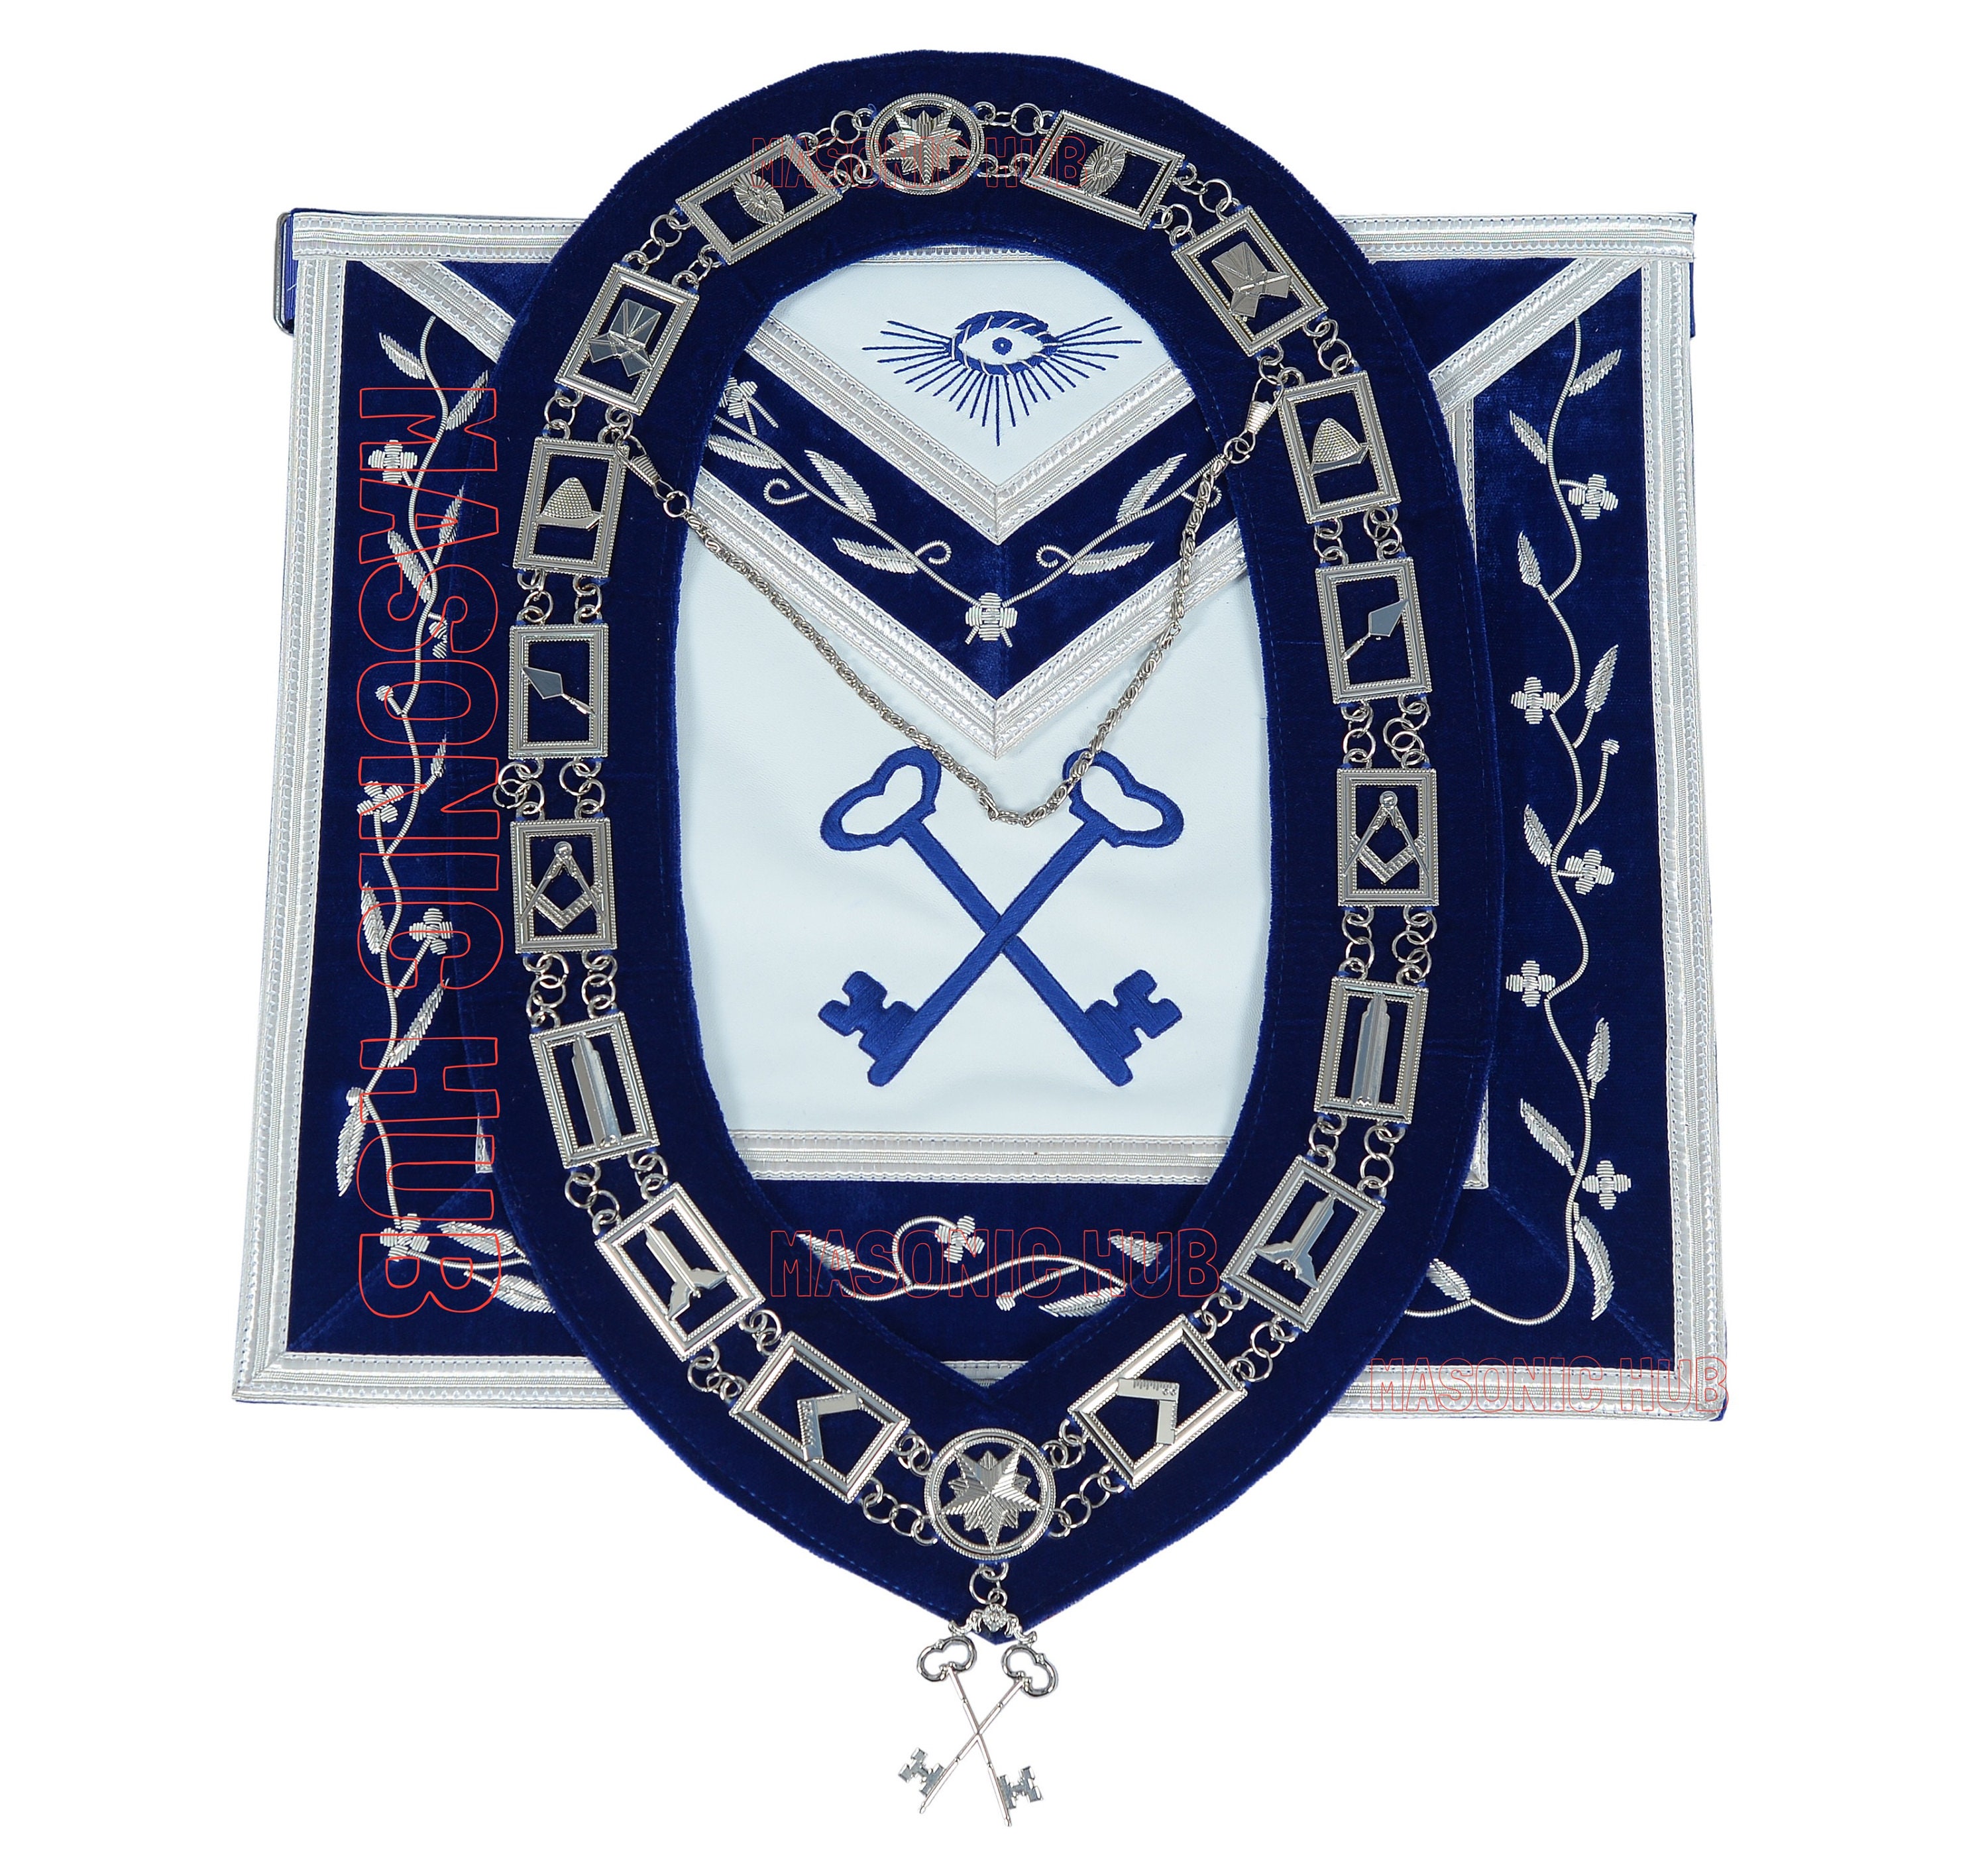 Masonic Past Master Quadrant Embroidery Iron On/sew on Patches, 3